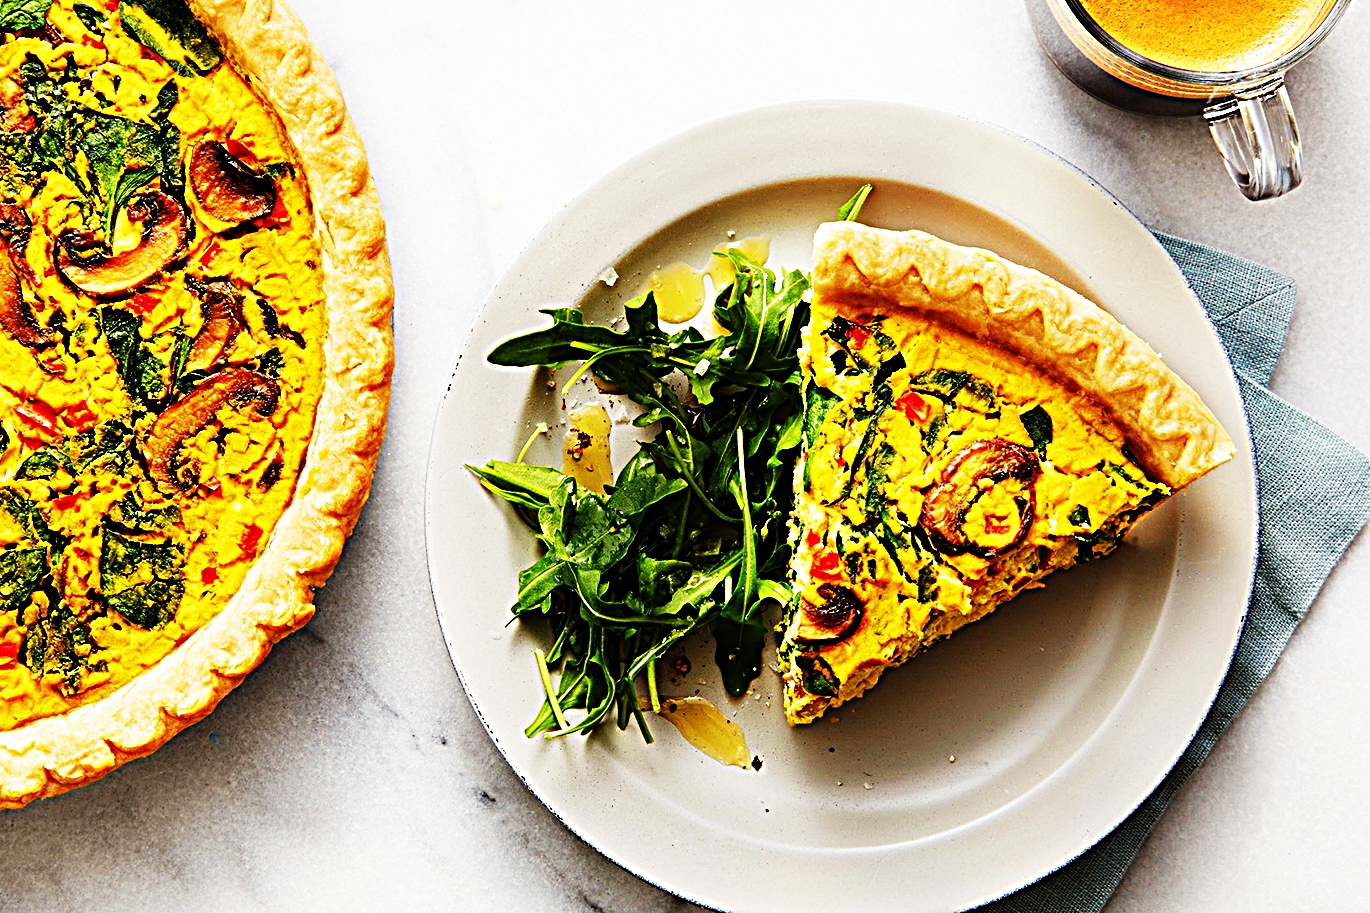 Stupid-Easy Recipe for Vegan Spinach, Mushroom, and Red Pepper Quiche (#1 Top-Rated)